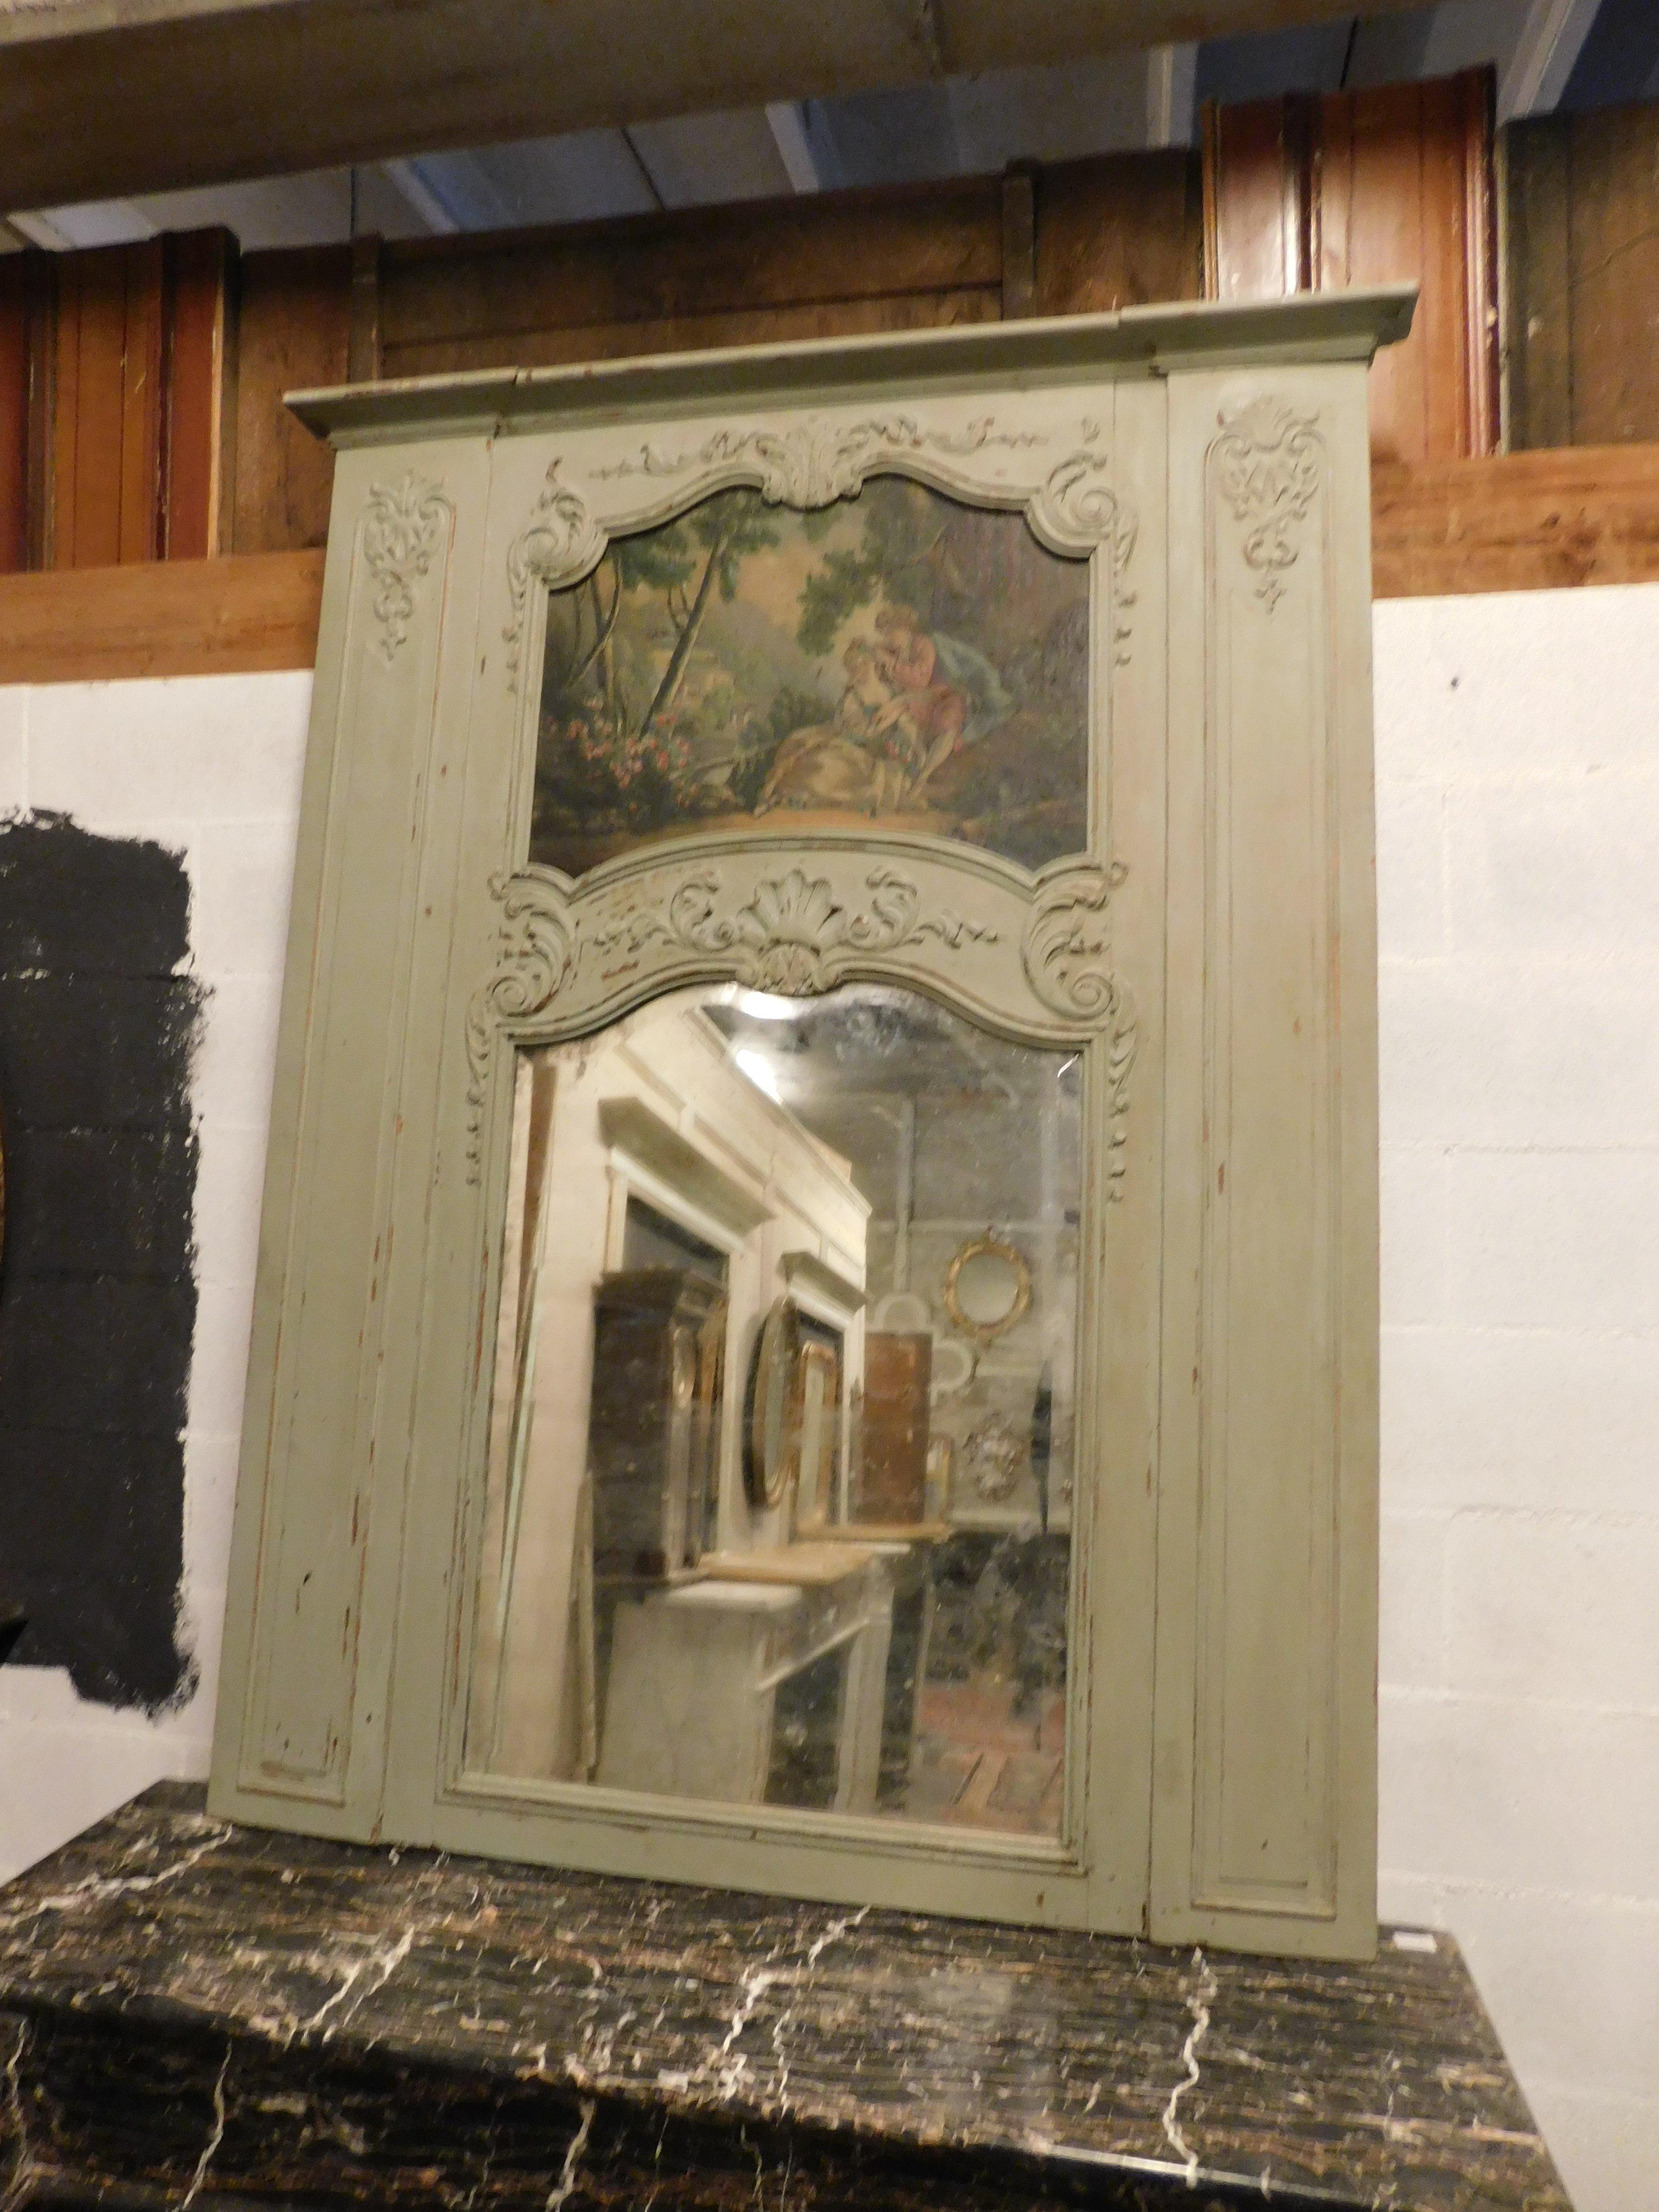 Ancient mirror above the fireplace, hand lacquered with painted in the upper part and frame with sculpted details, built in the 19th century in France, probably part of a boiserie, by now it could be used as a large entrance mirror, as a fireplace,